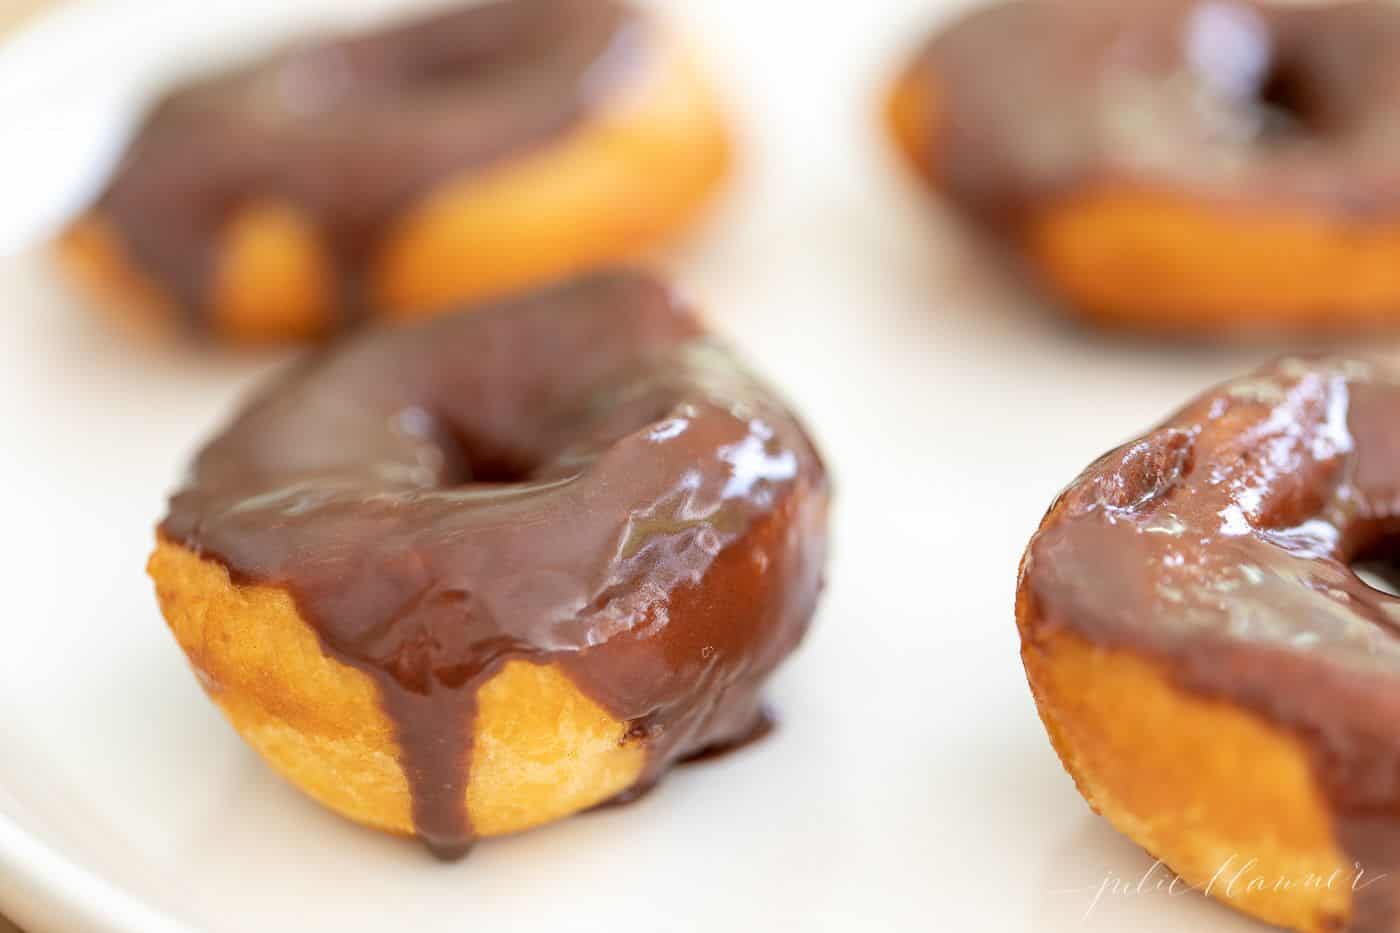 Biscuit donuts covered in chocolate icing on a white plate.